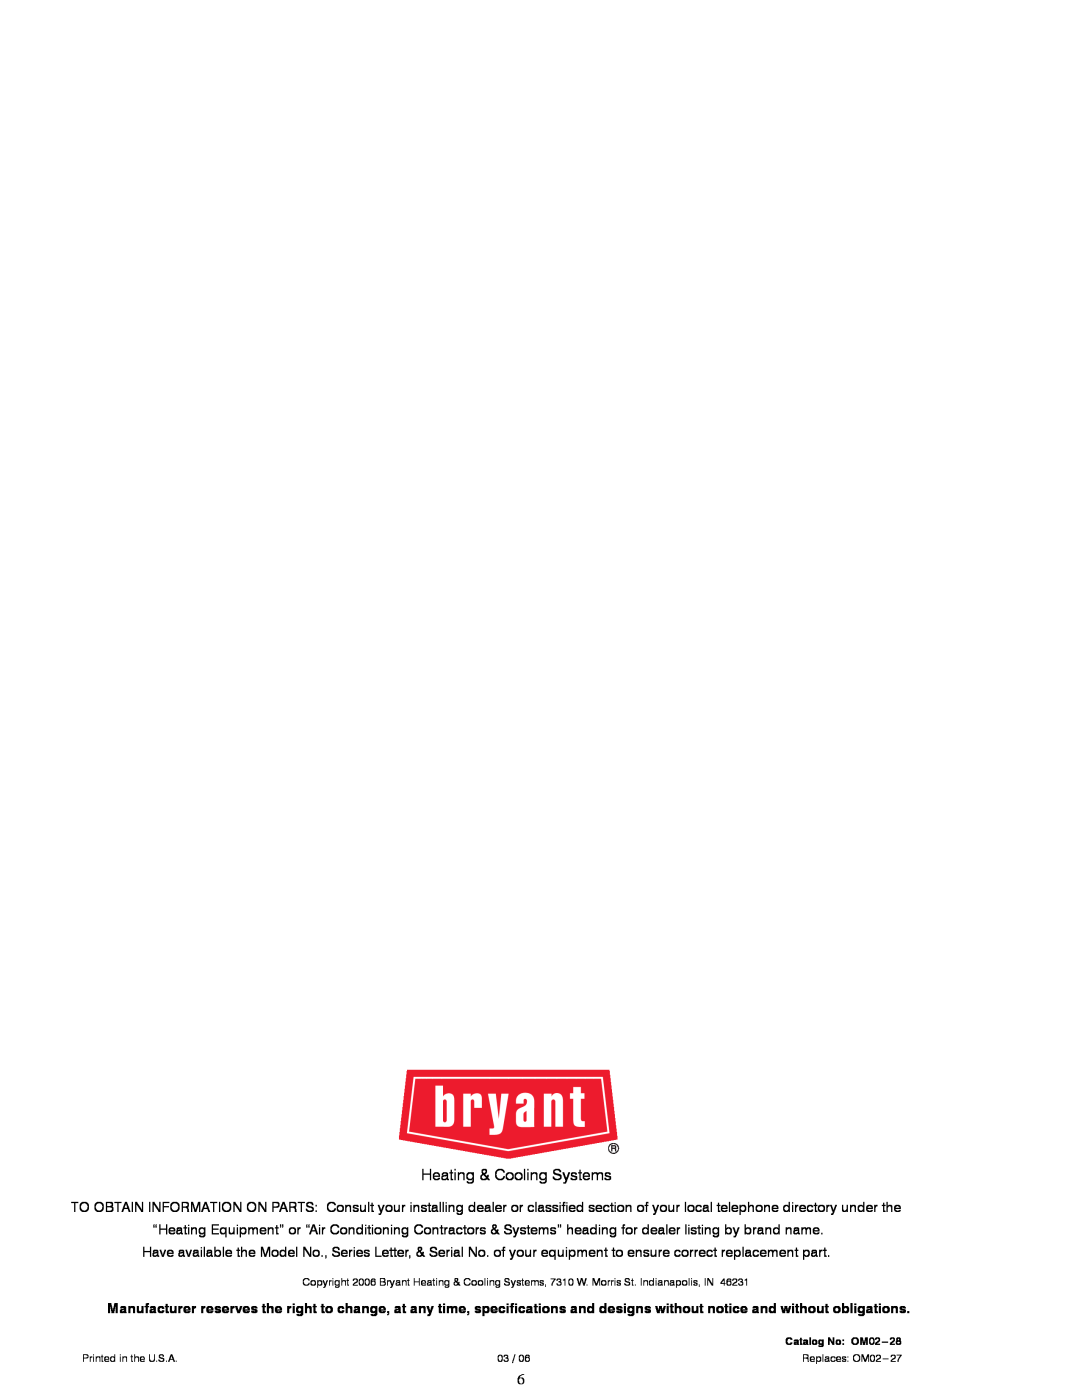 Bryant Central Air Conditioning System manual Heating & Cooling Systems, Catalog No OM02 